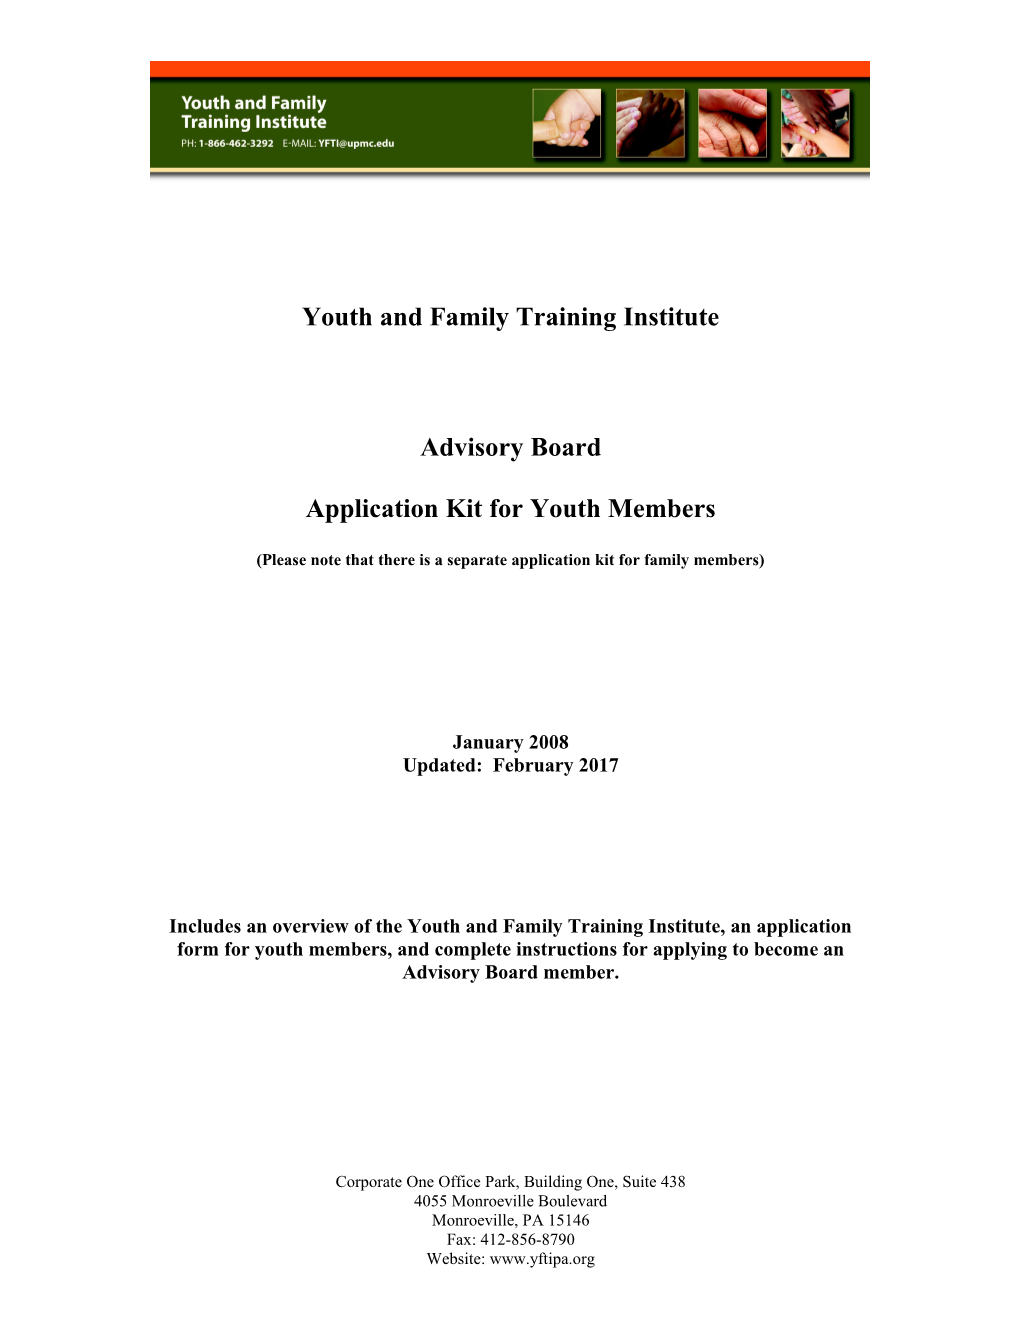 The Pennsylvania Youth and Family Training Institute